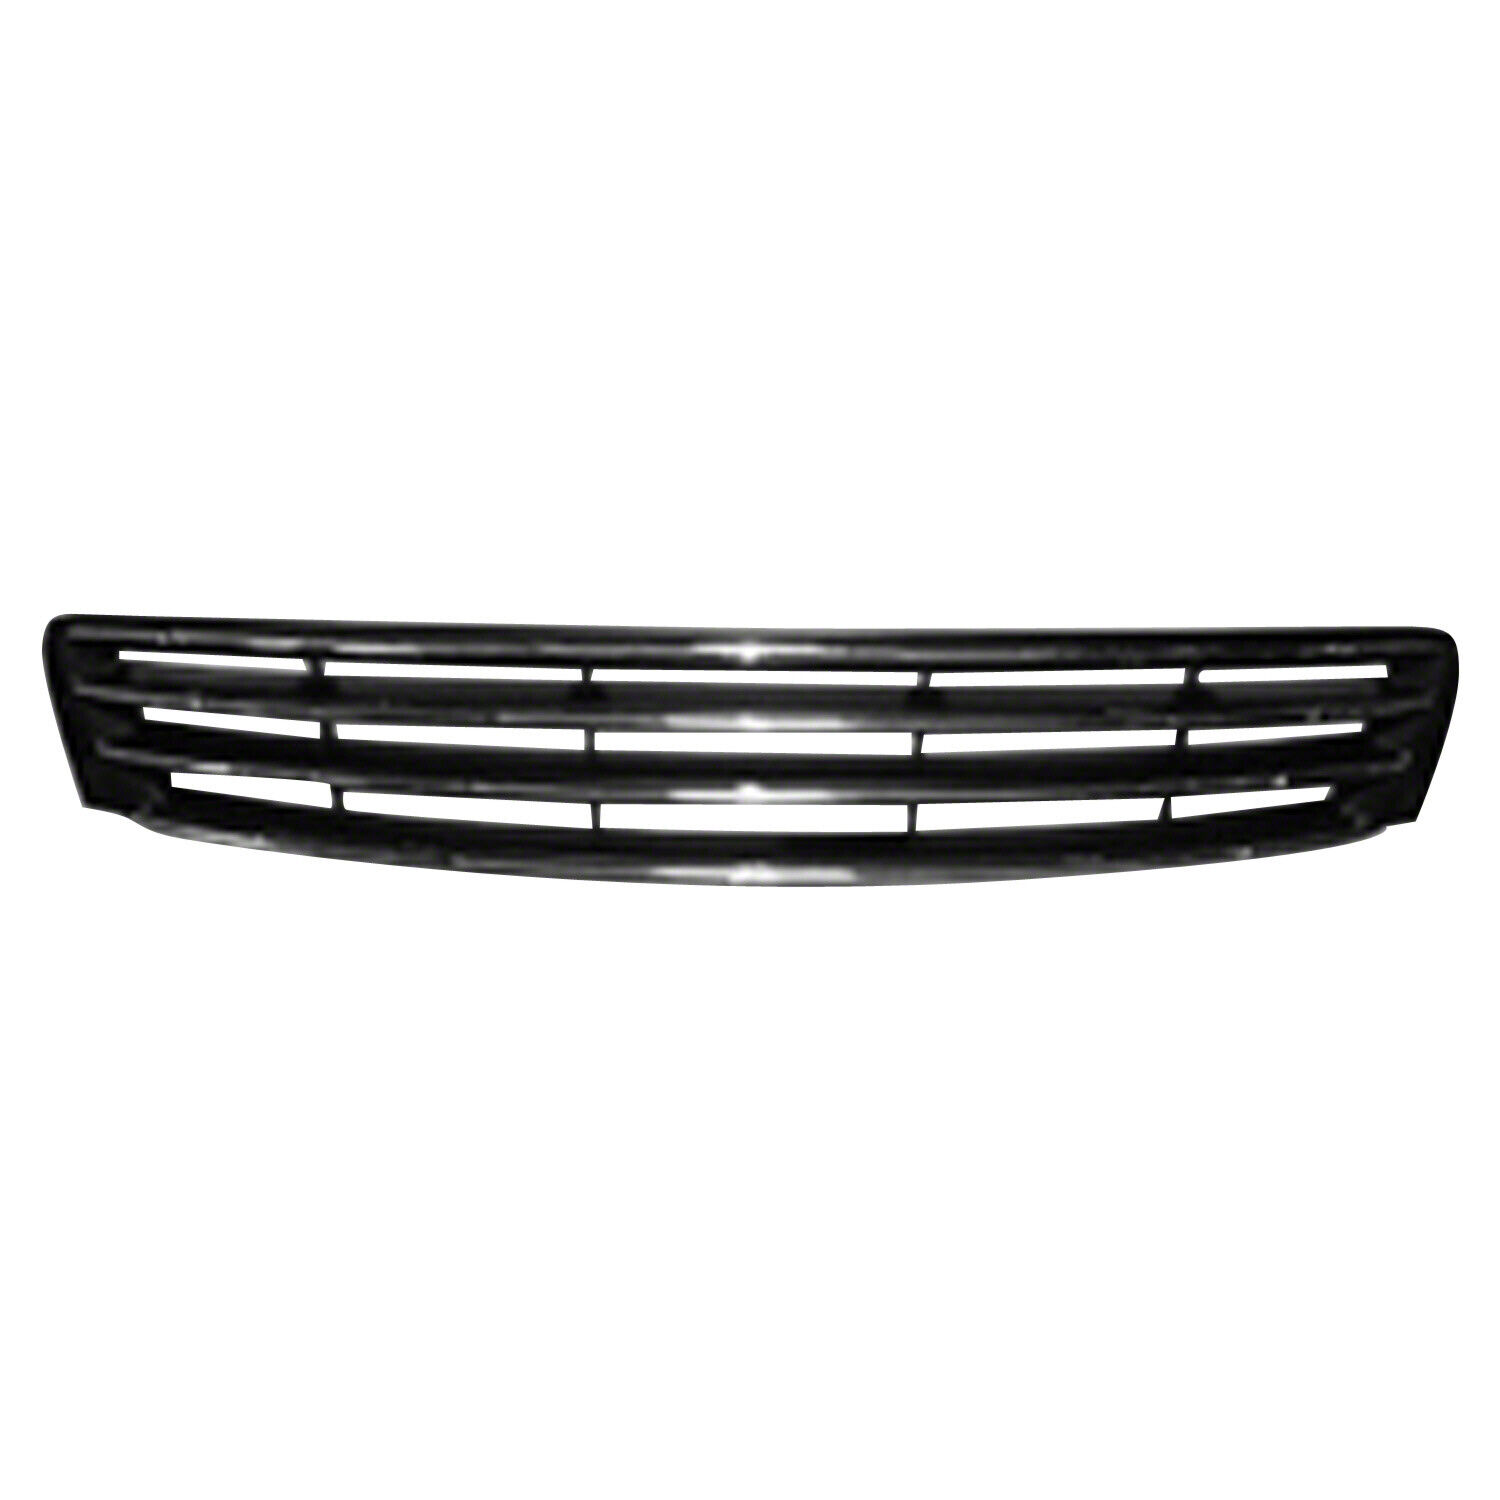 LX1200114 New Replacement Front Grille Fits 2002-2003 Lexus ES300